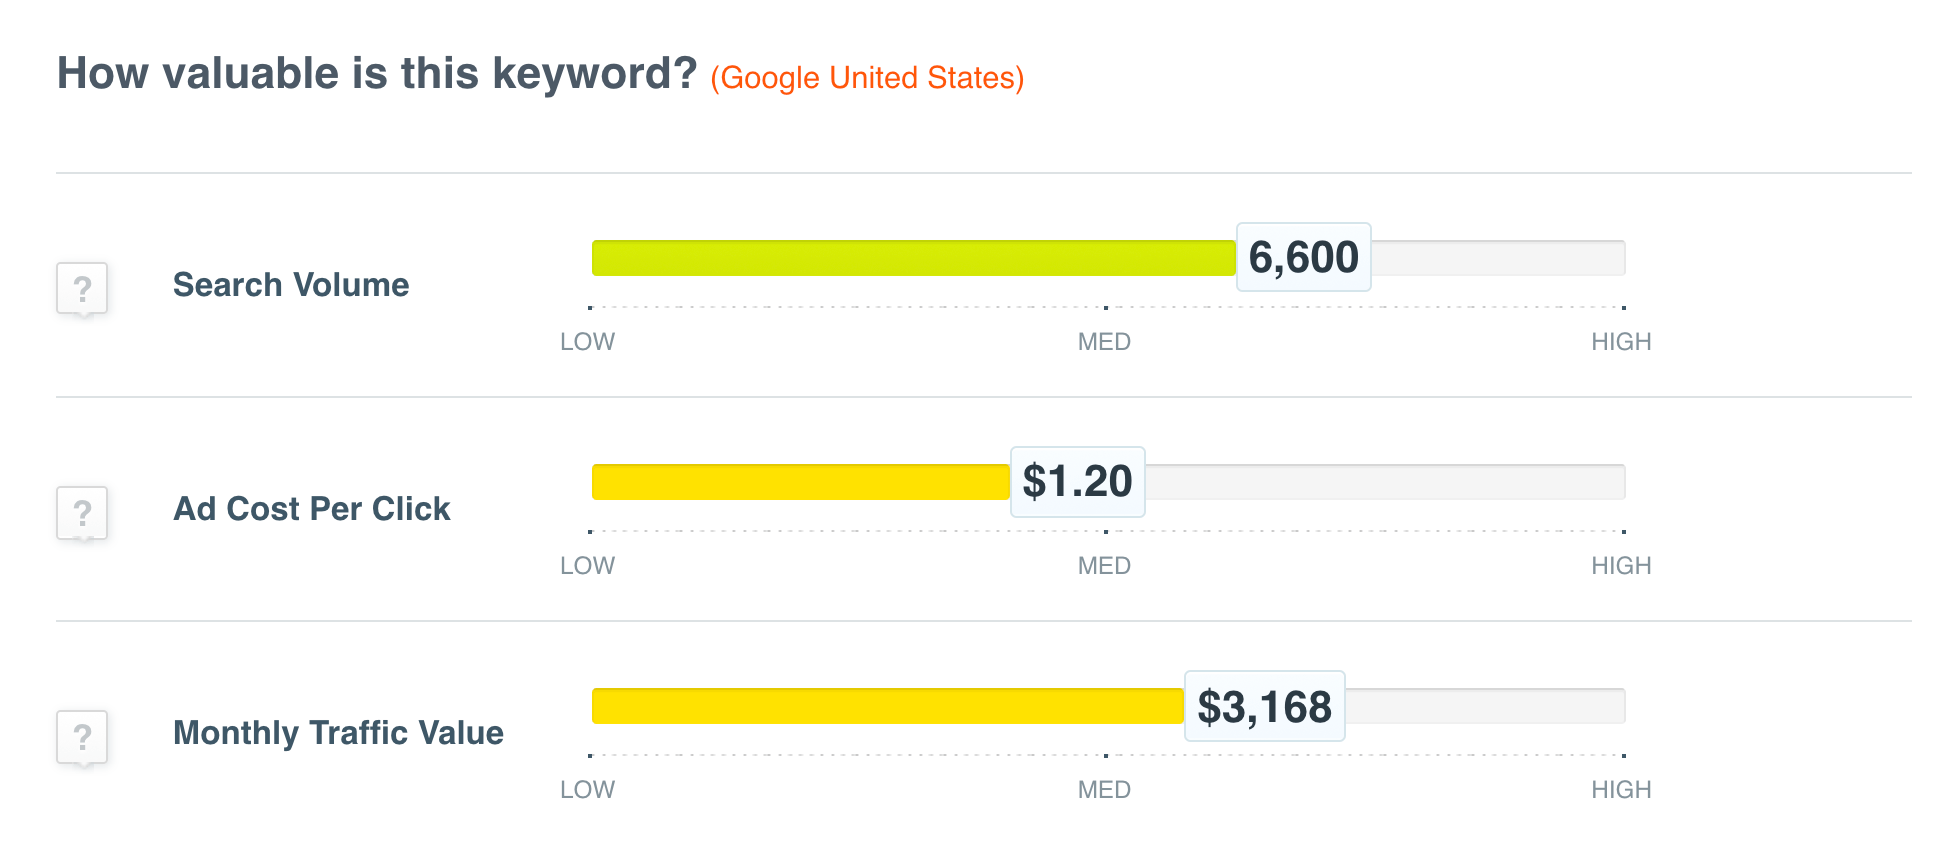 how valuable is this keyword?